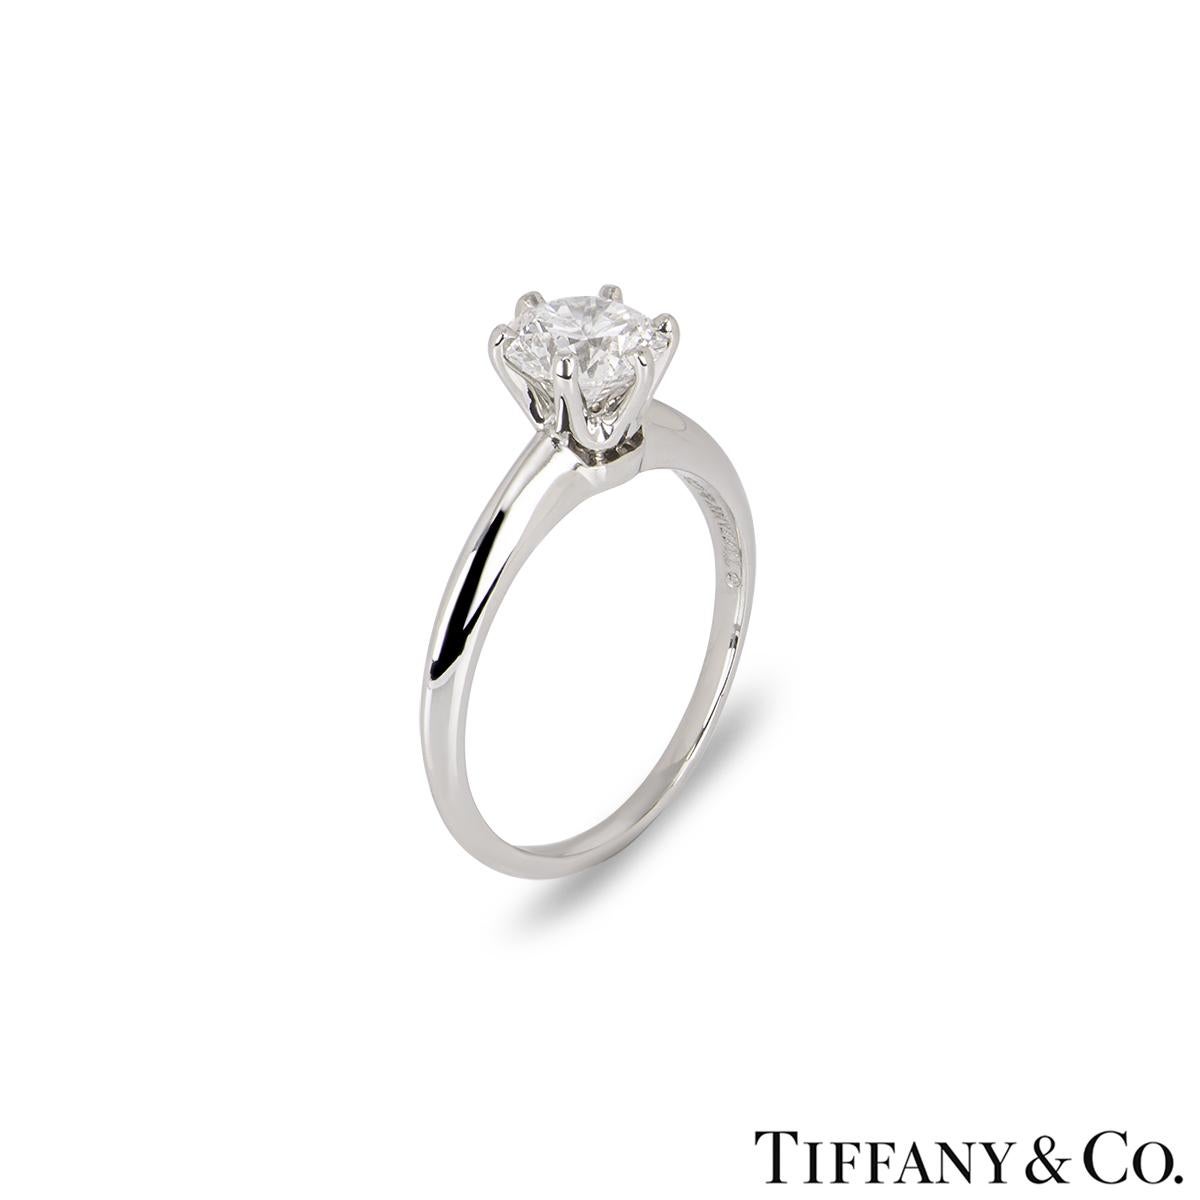 A stunning platinum diamond solitaire ring by Tiffany & Co. from the Setting collection. The solitaire features a round brilliant cut diamond set to the centre in a 6 claw mount weighing 1.11ct, D colour and VS1 clarity. The diamond scores an